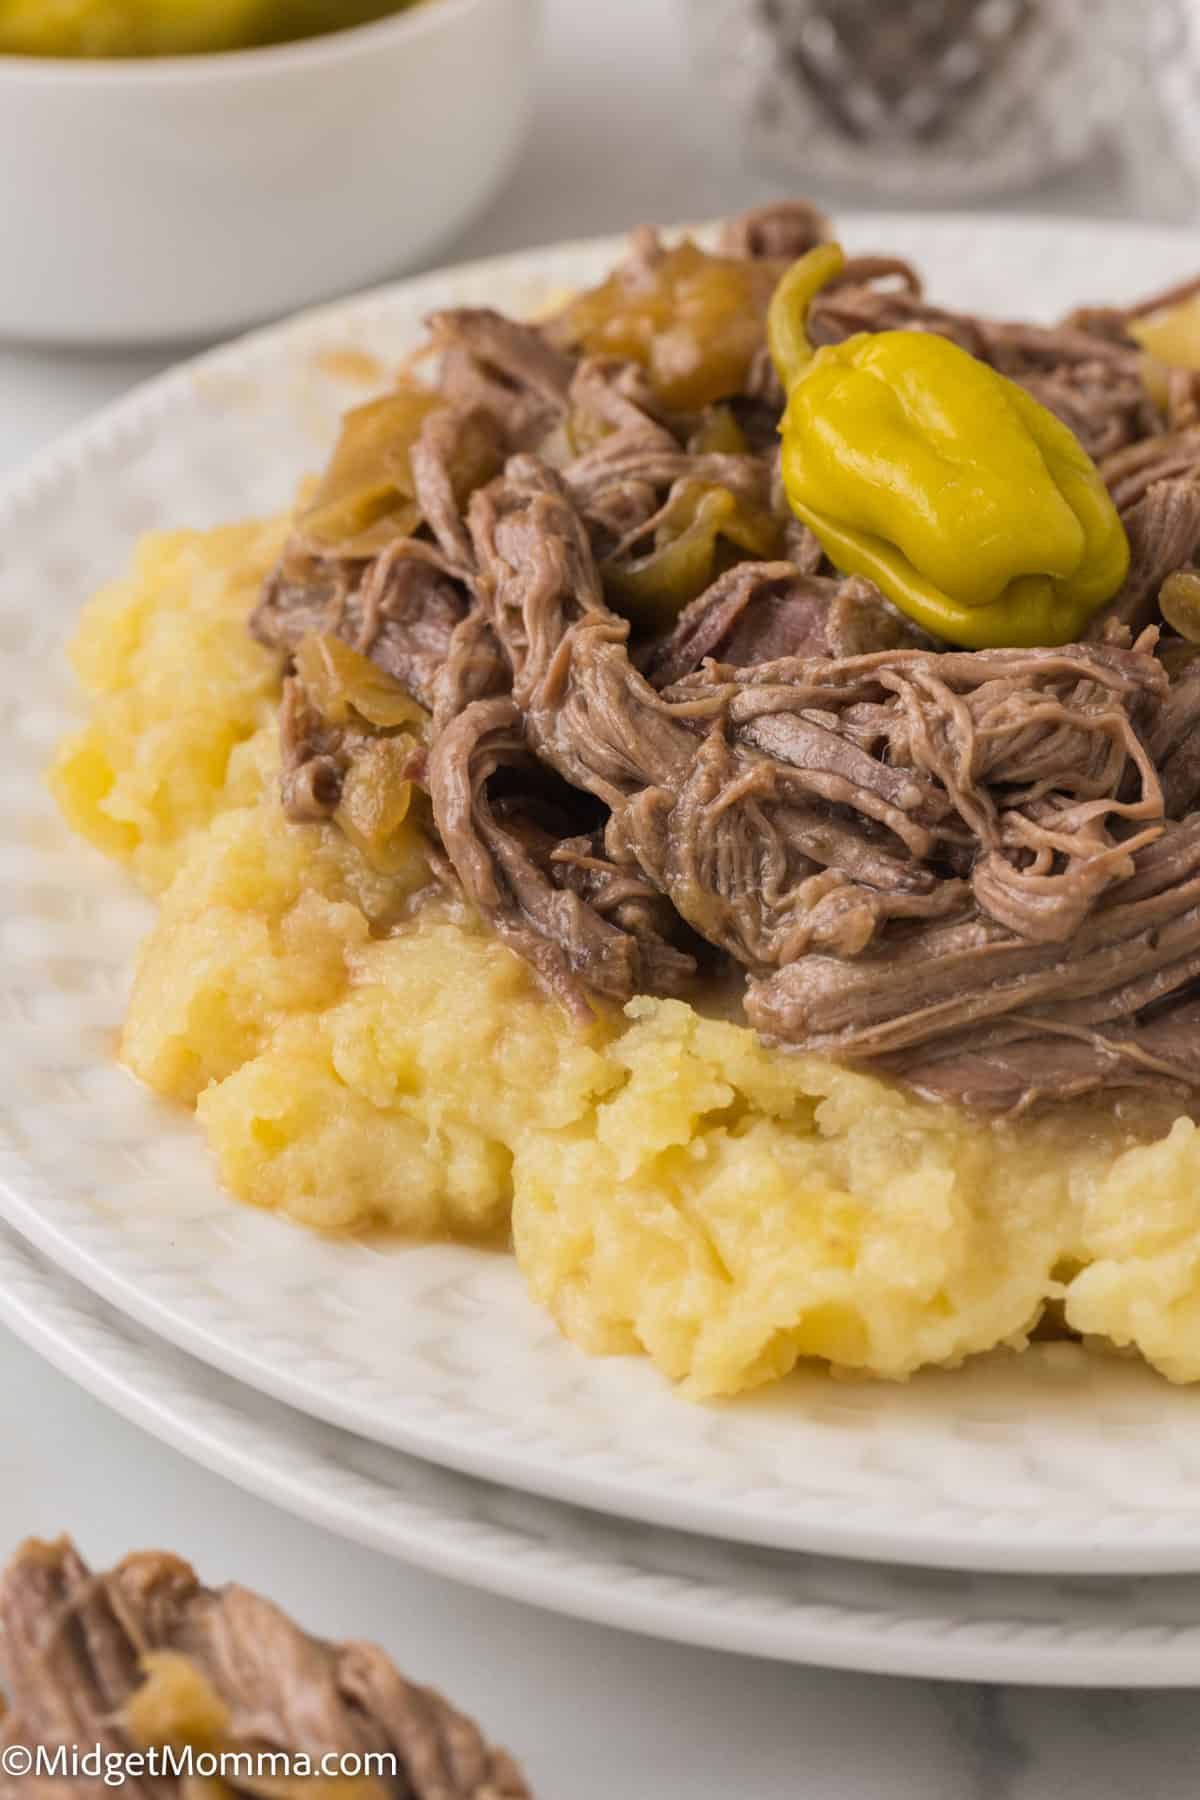 A plate with mashed potatoes topped with shredded beef and a green pepper. A bowl with more peppers is partially visible in the background.